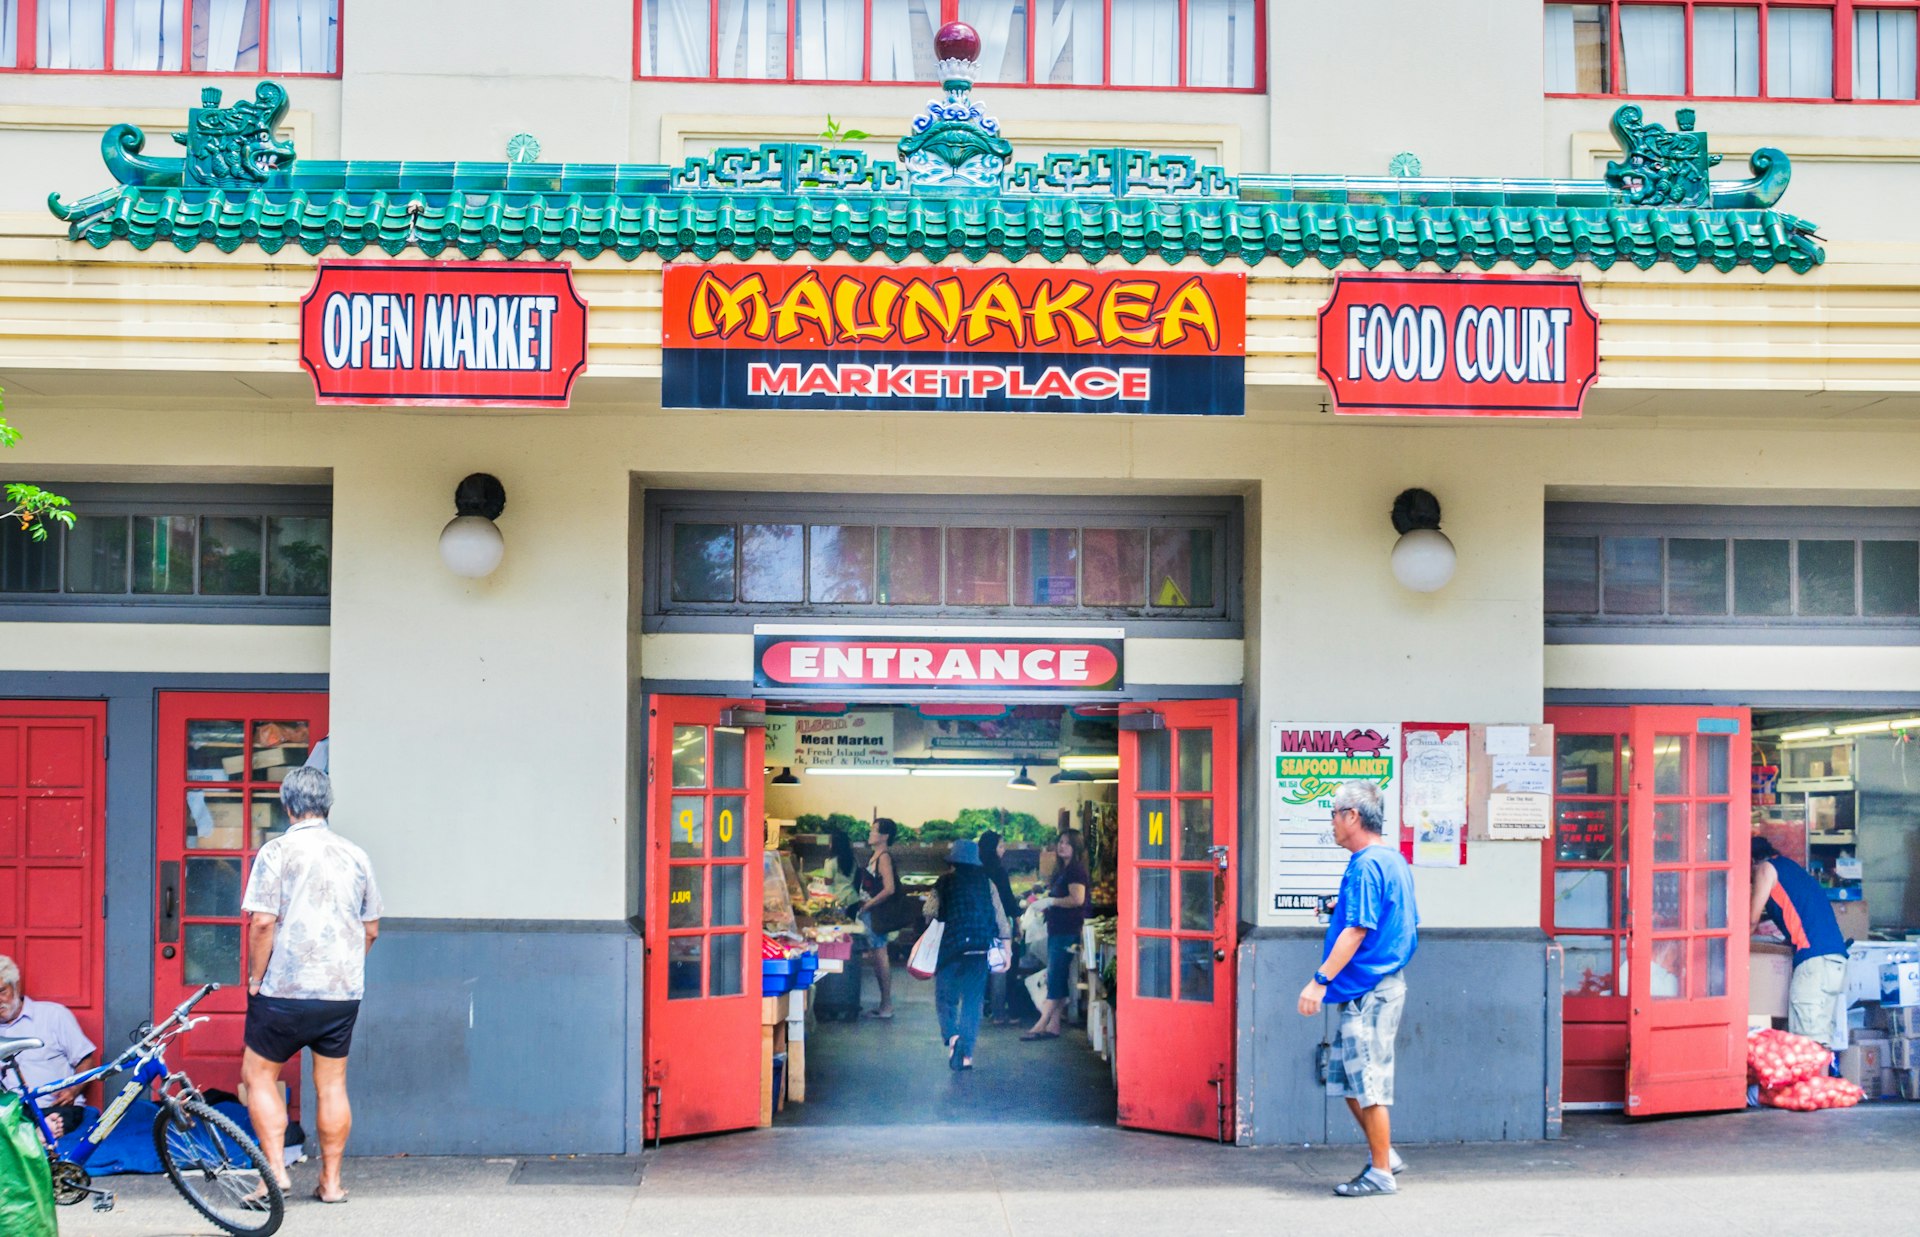 The exterior of a white building with red signs that read: "Open market", "Maunakea Marketplace" And "Food Bank"